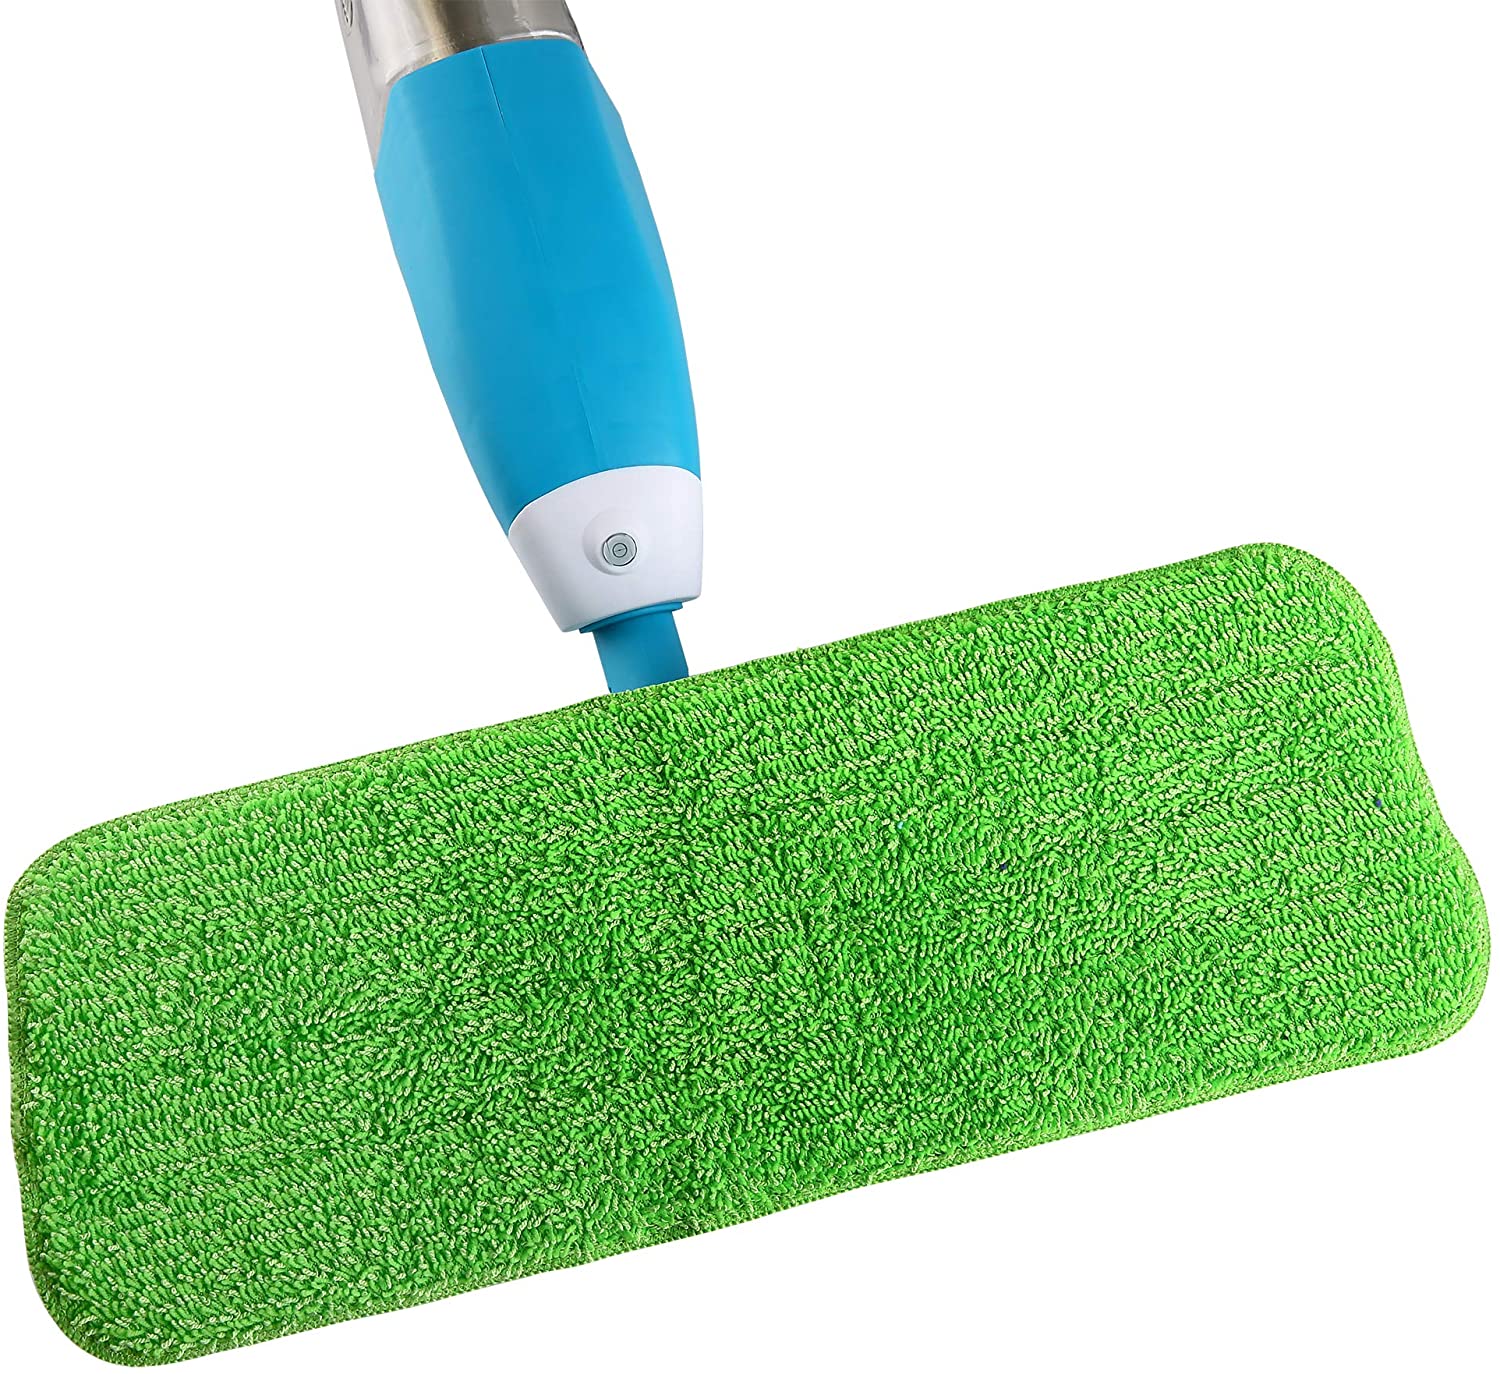 Microfiber flat mop replacement pads for Spray Mops and Reveal Mops Wet Mop Dry Mop